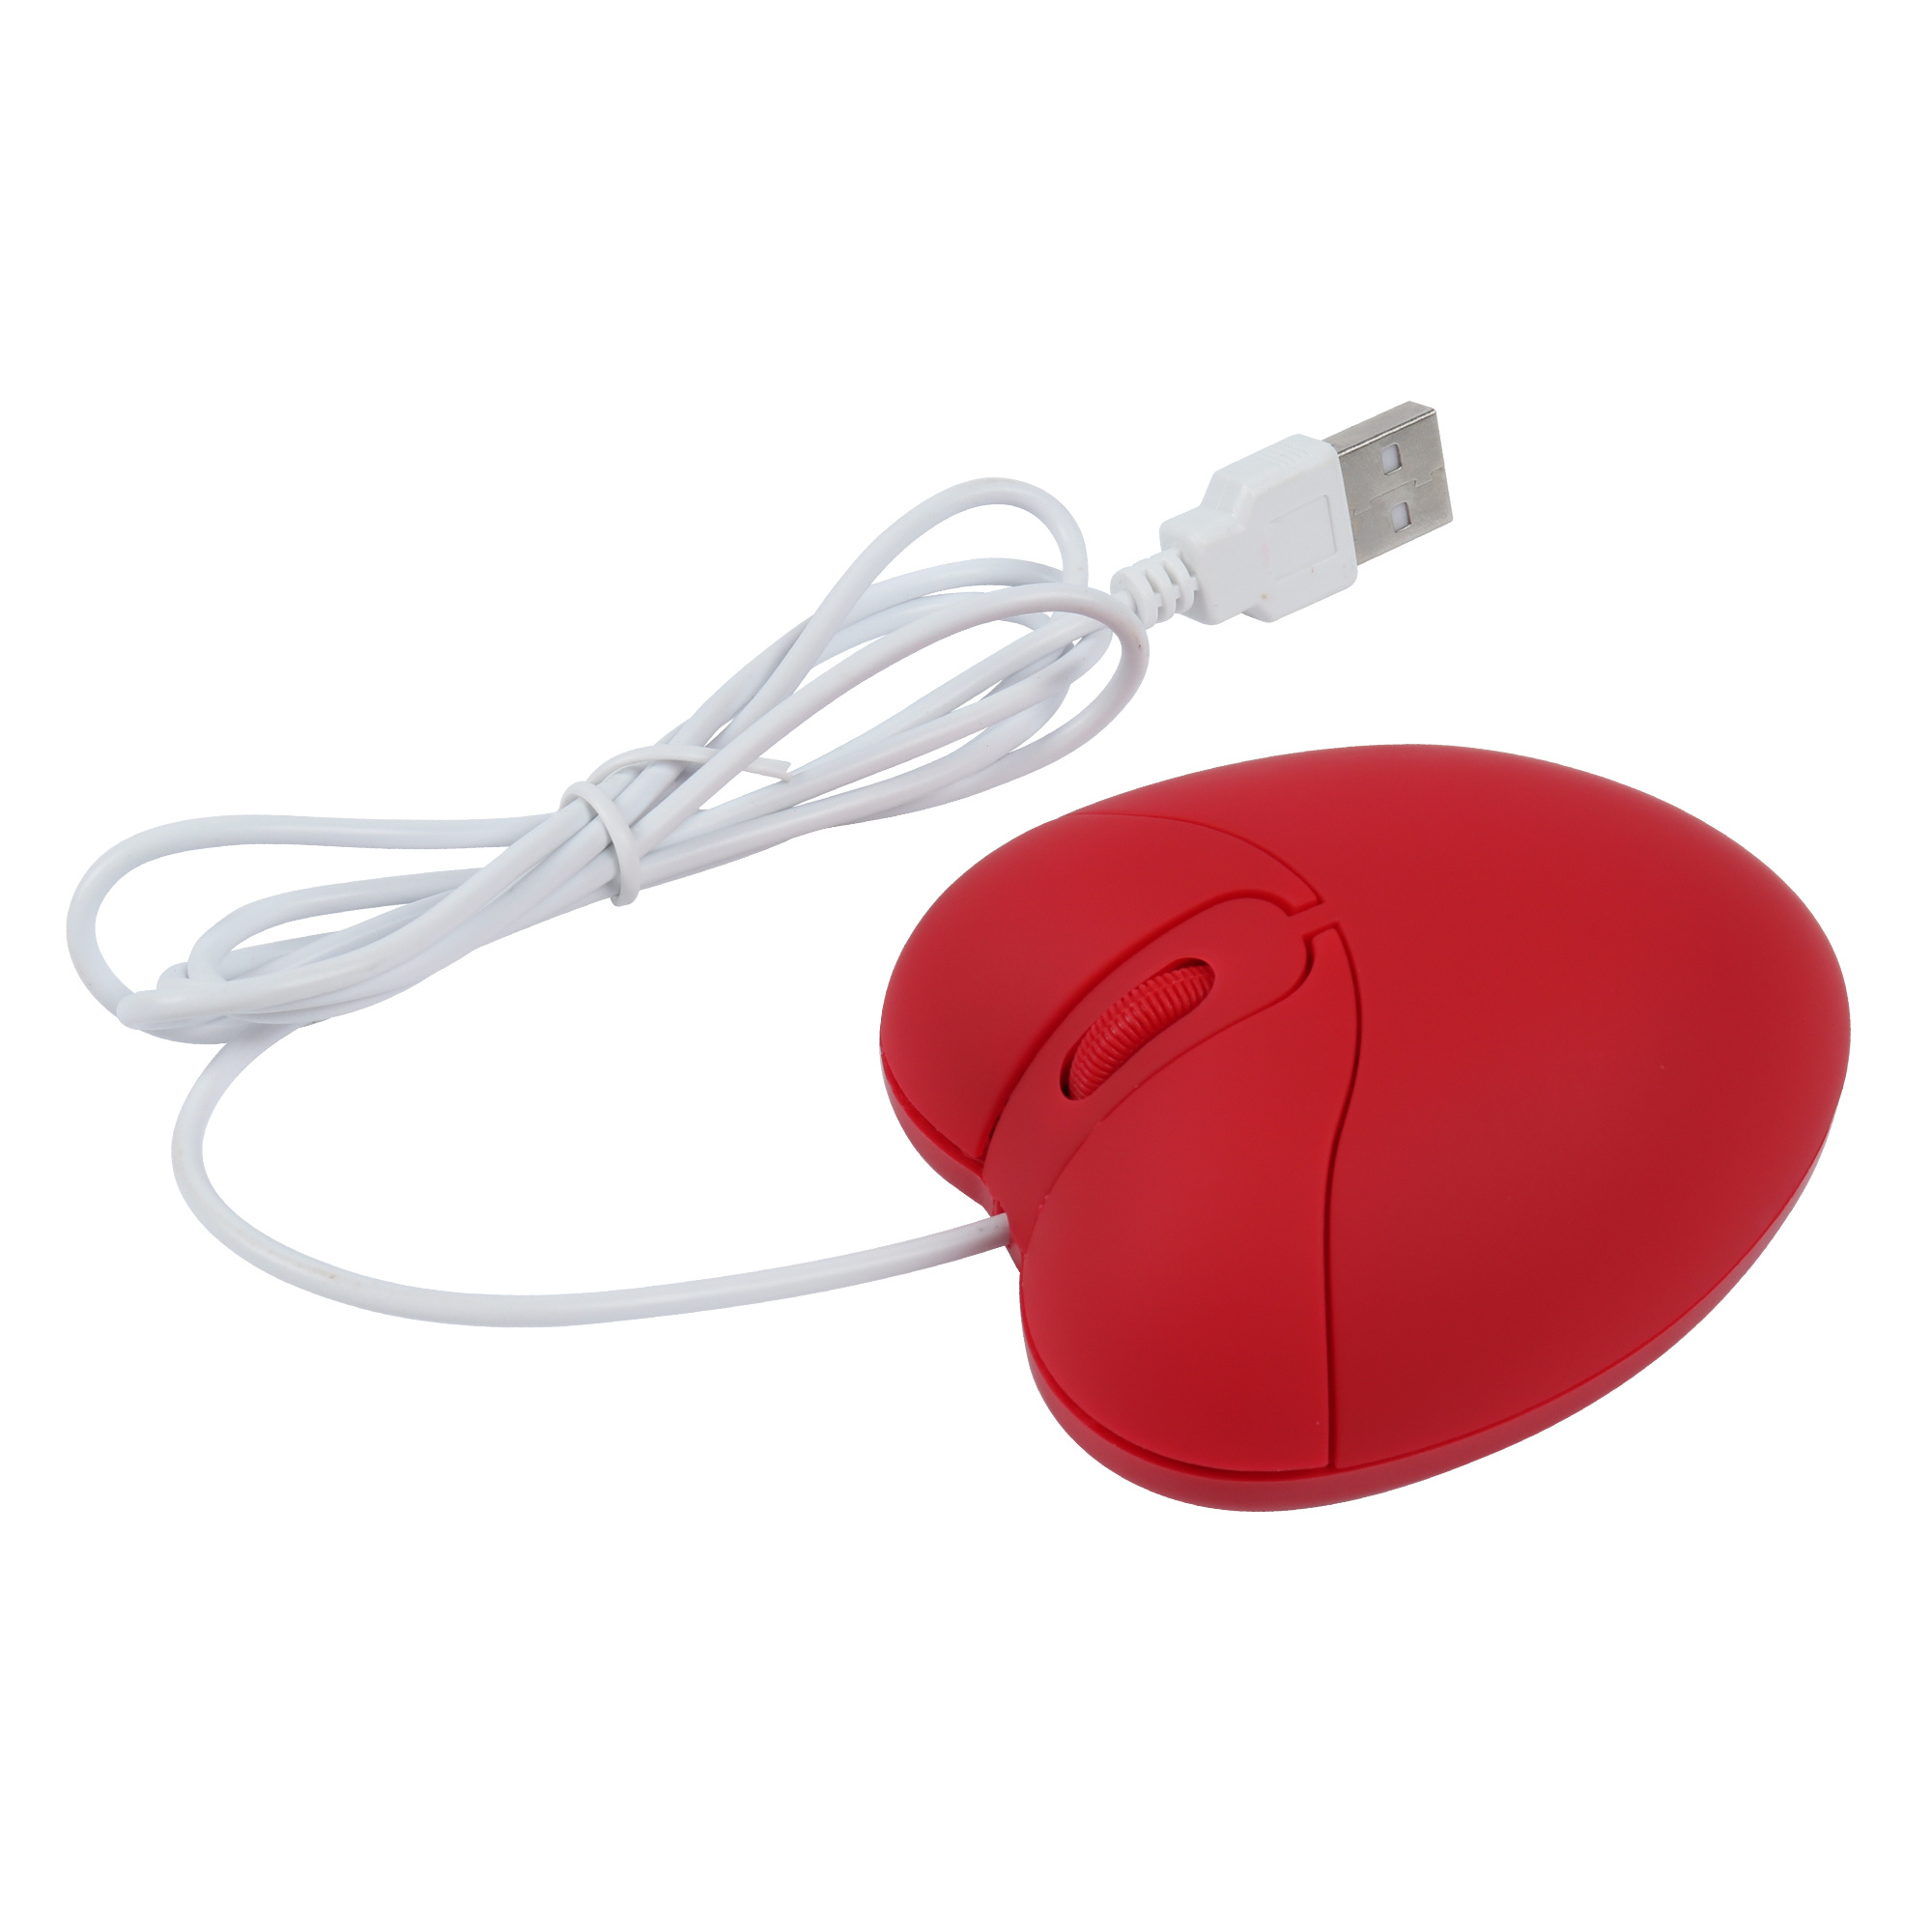 Kwamfuta-Wired-Mouse-USB-Optical-Creative-Gaming-Cute-Mause-Ergonomic-Love-Heart-3D-Mice-For-Laptop (6)